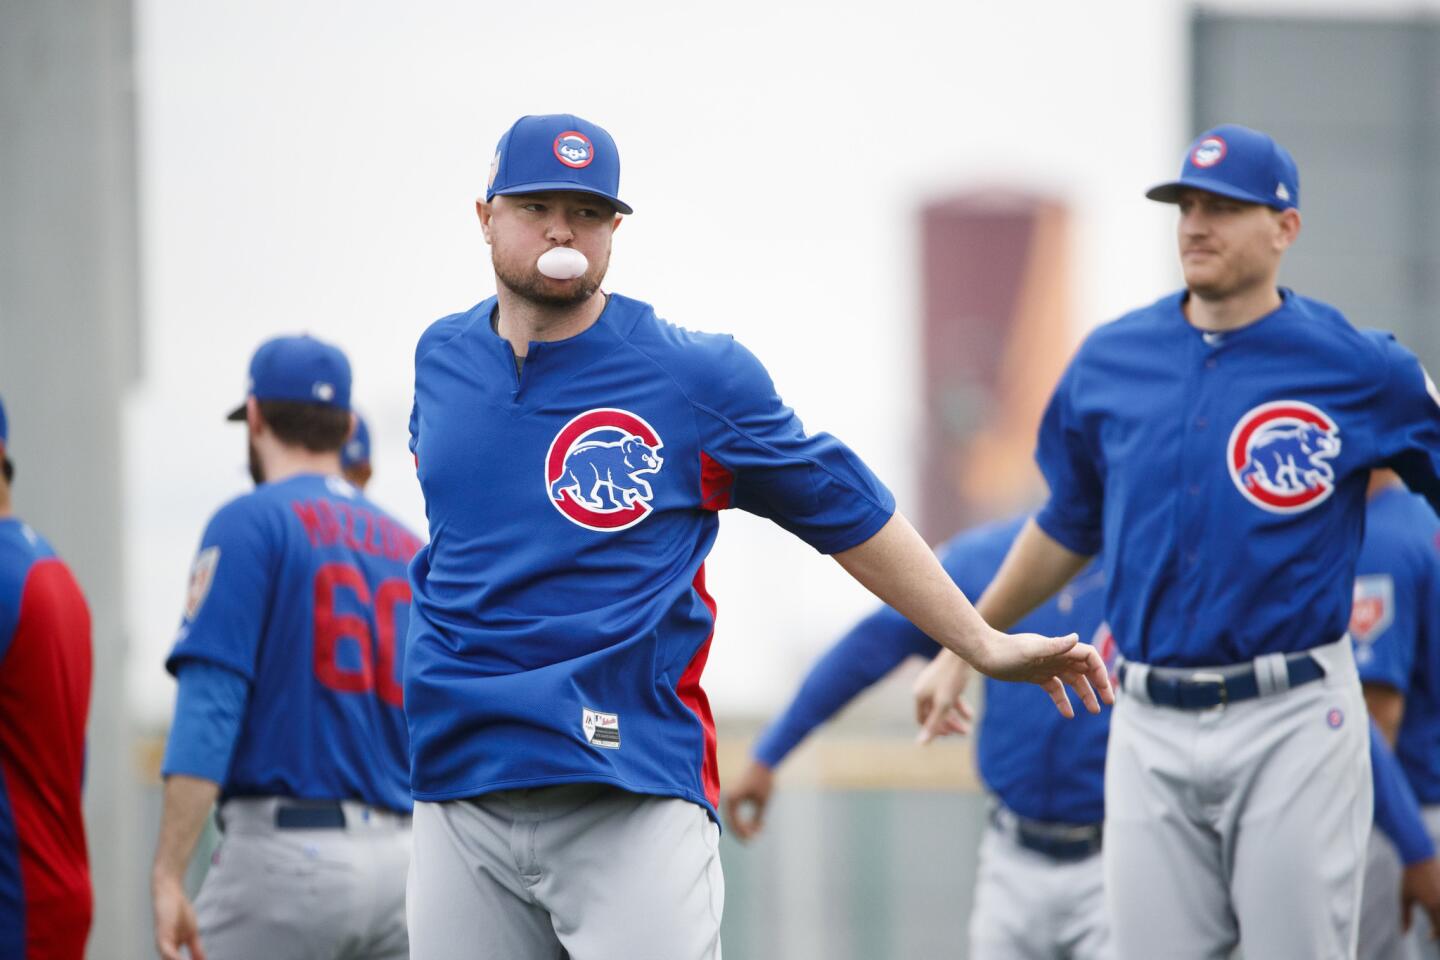 chi-ct-ct-cubs-spring-training-0215-54-ct0063681009-20180215